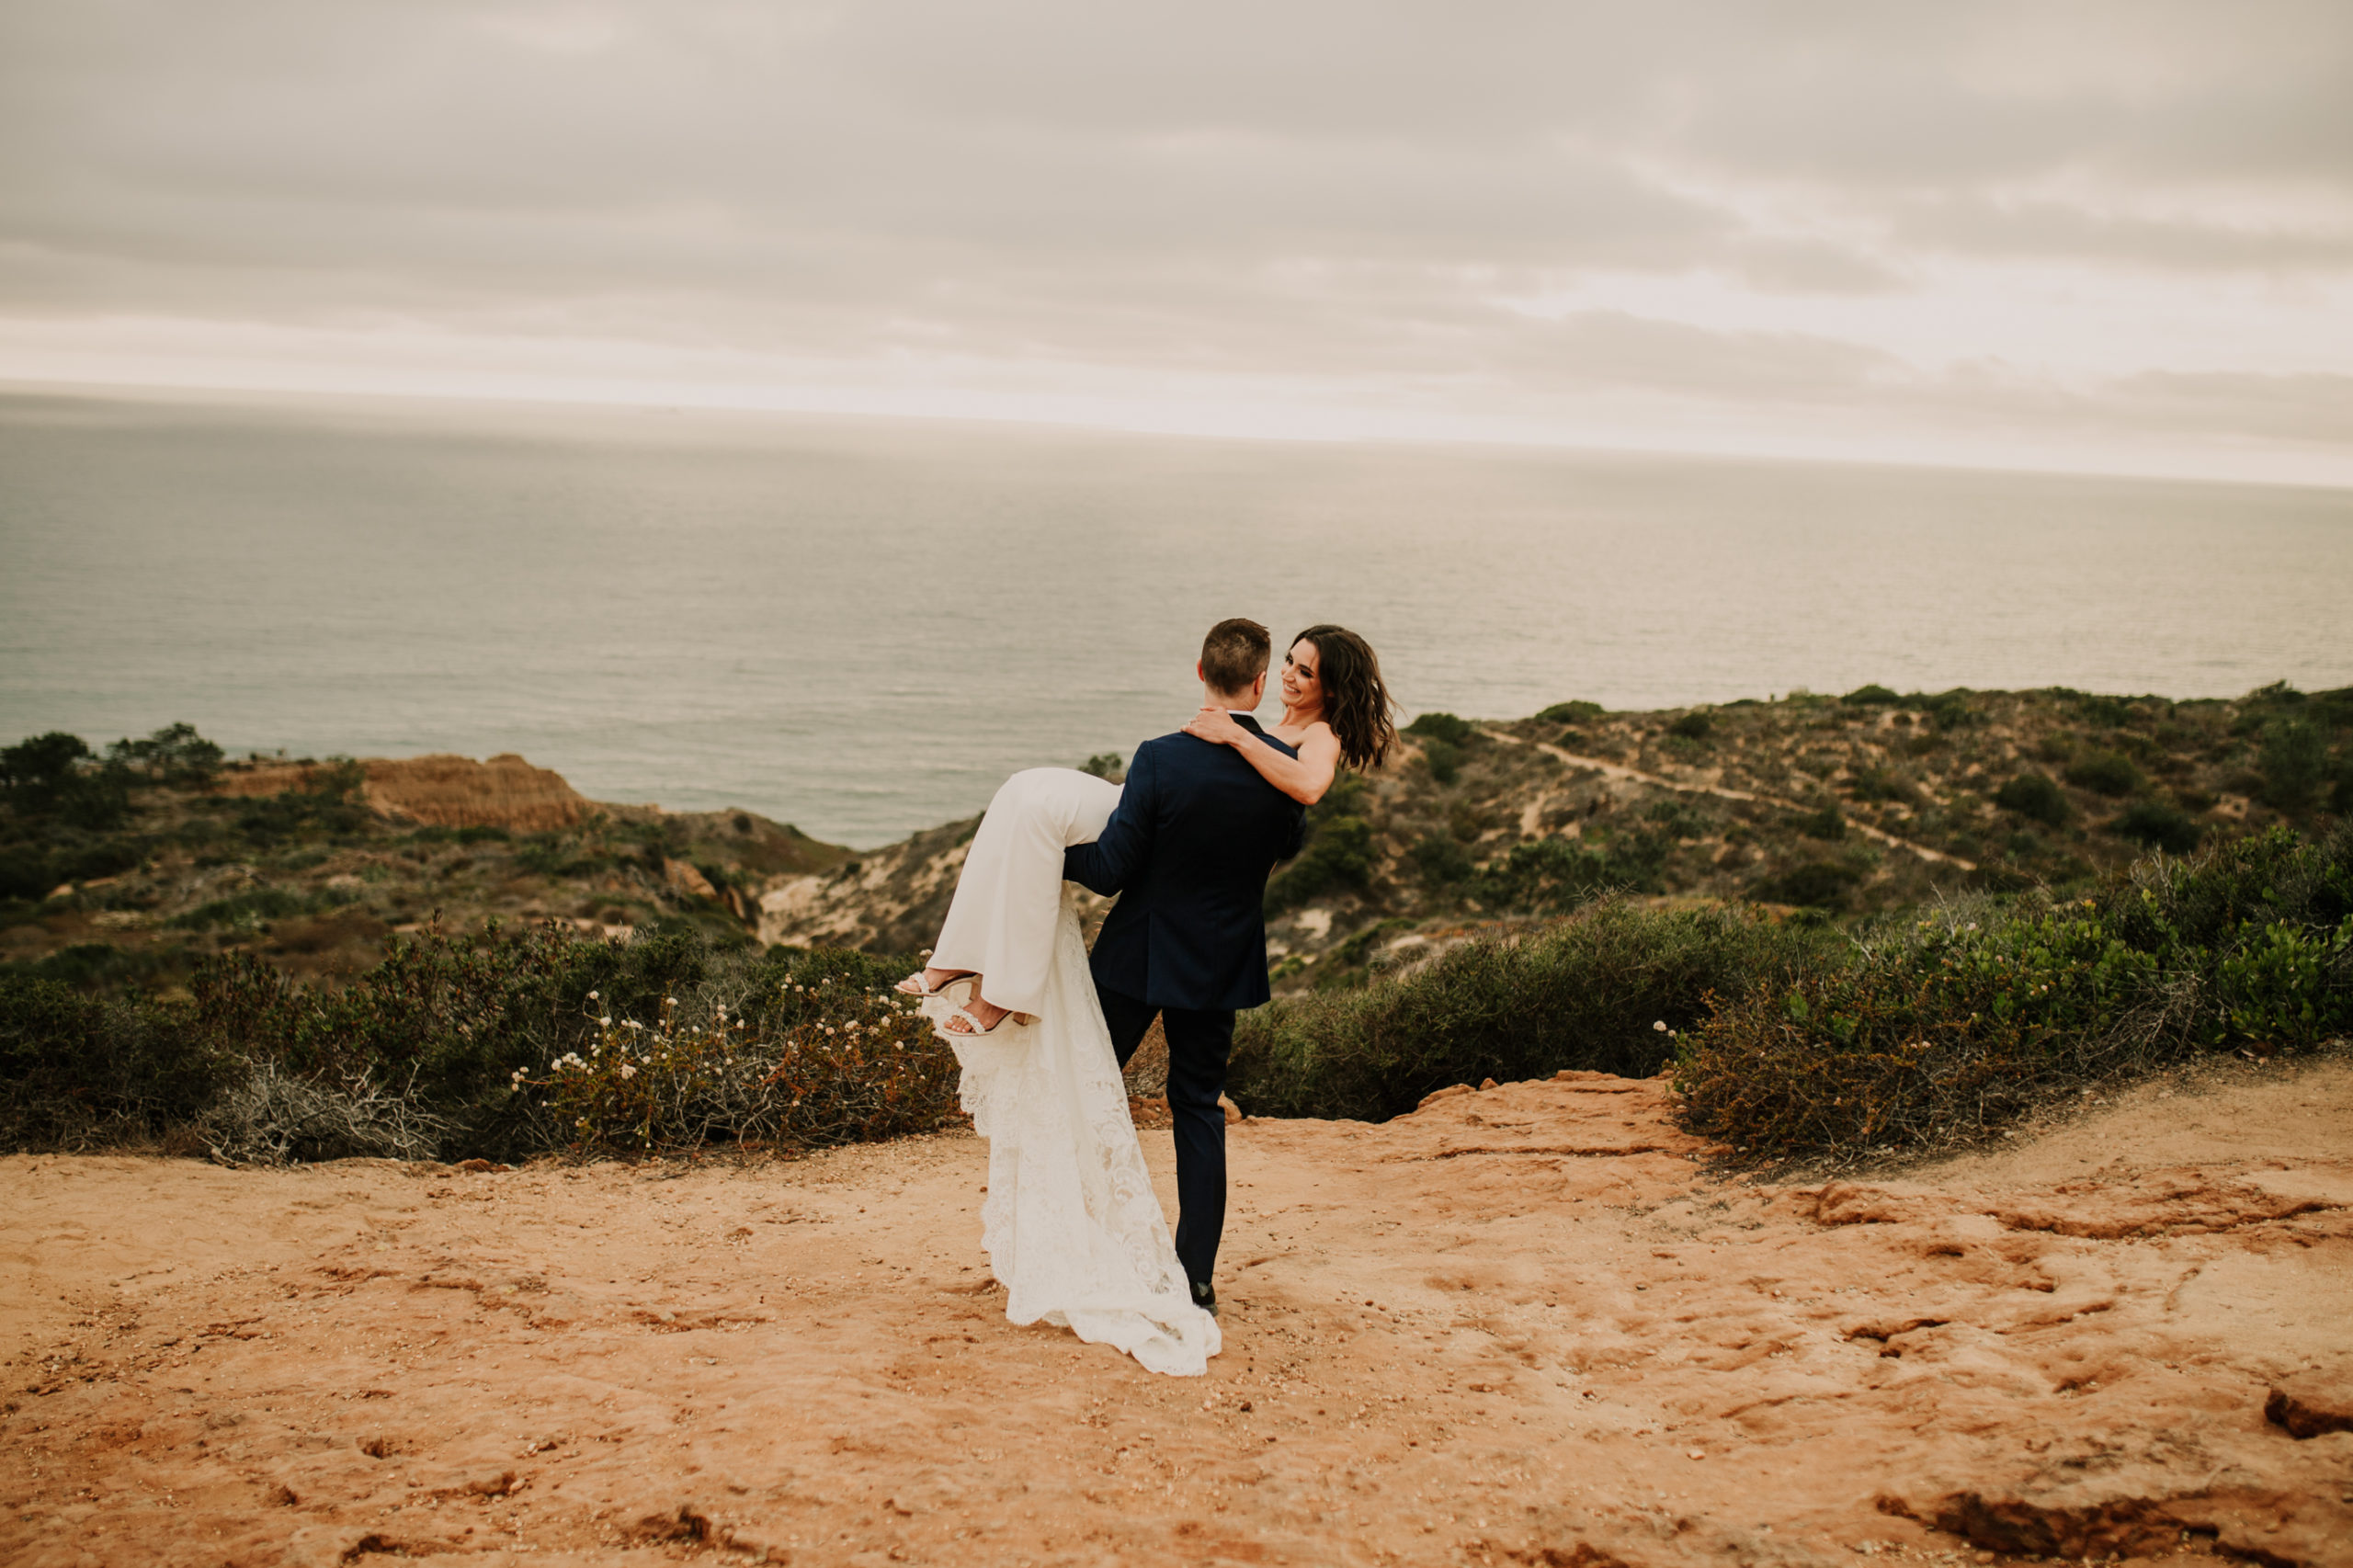 HOW TO BECOME AN ELOPEMENT PHOTOGRAPHER

If you want to become an elopement photographer, check out the top 25 things to know when transitioning to become an elopement photographer!